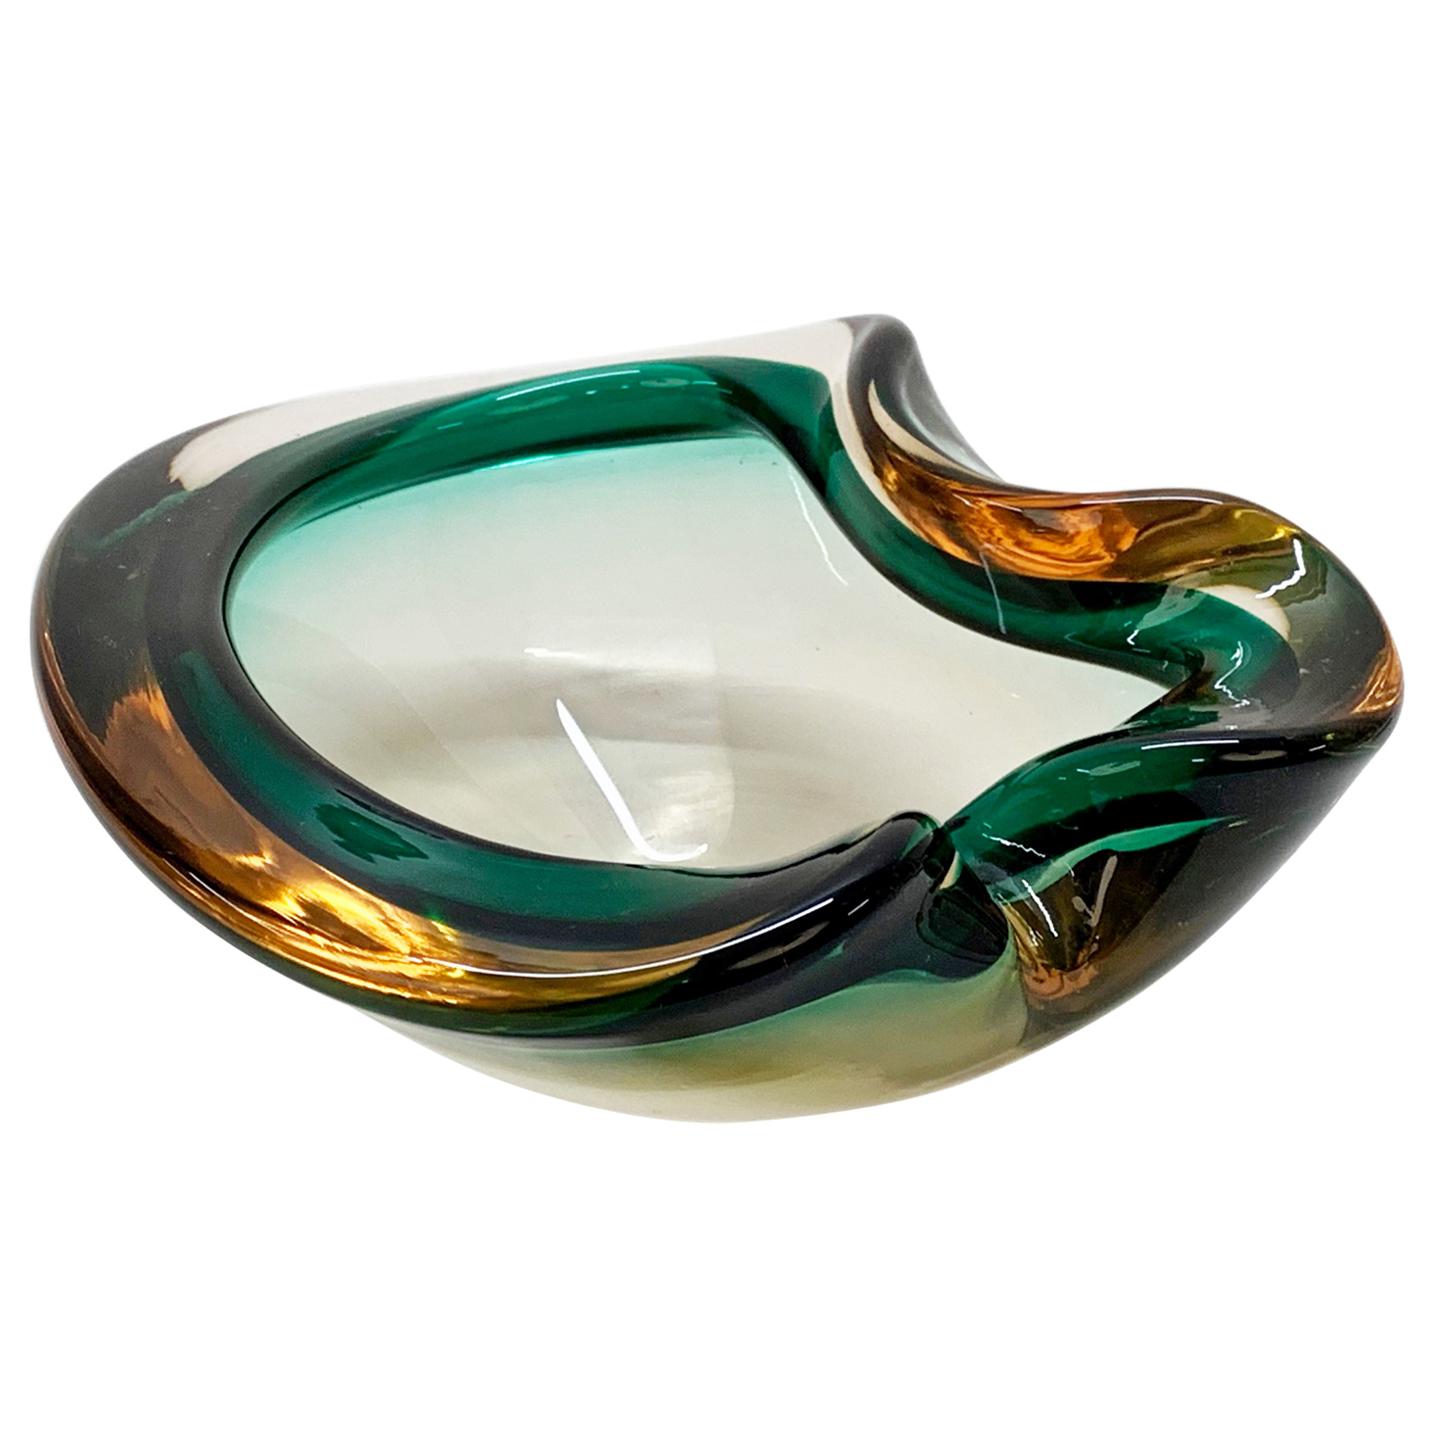 Heart Green and Amber, Glass Sommerso Murano Glass Bowl or Ashtray, Italy, 1960s